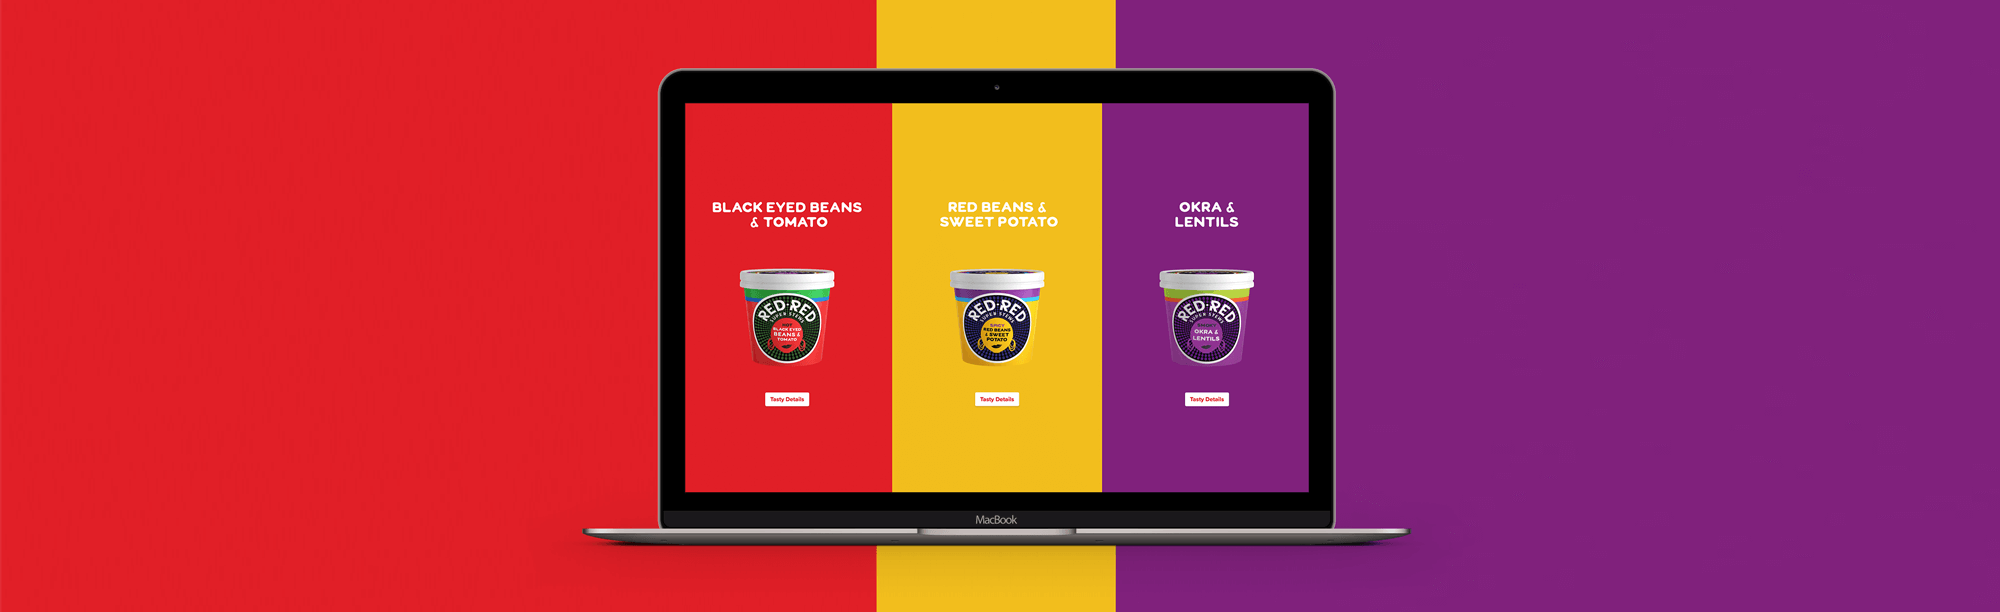 Laptop mockup of the three Red Red flavour variants, each on their own vivid colour background - red, yellow and purple